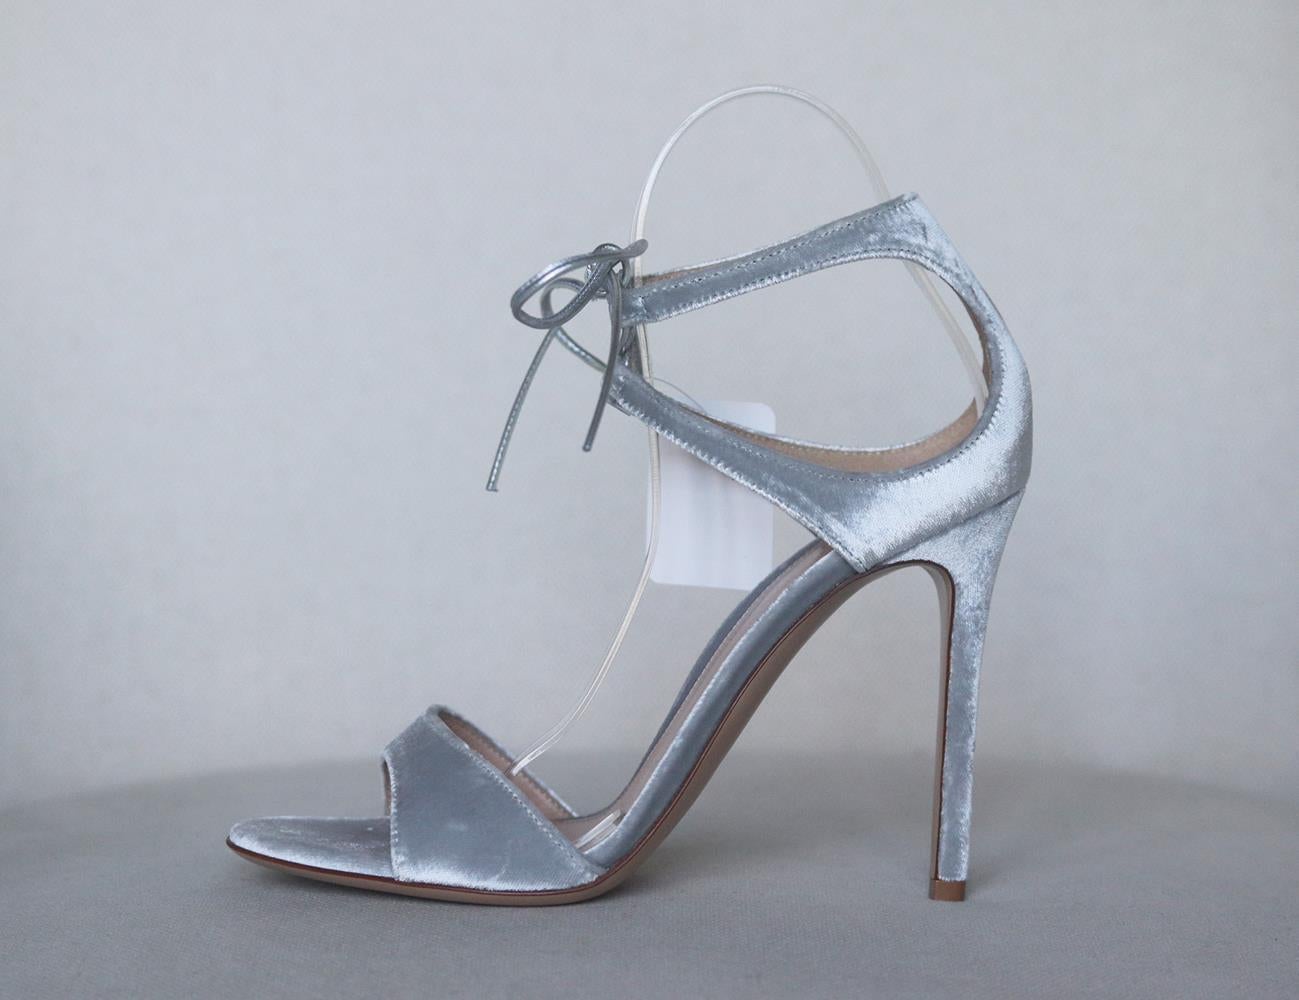 Gianvito Rossi's coveted 'Darcy' sandals are updated this season in silver, made from soft velvet, they're designed with a slim double strap that ties elegantly around the ankle. Heel measures approximately 105mm/ 4 inches. Silver velvet. Ties at